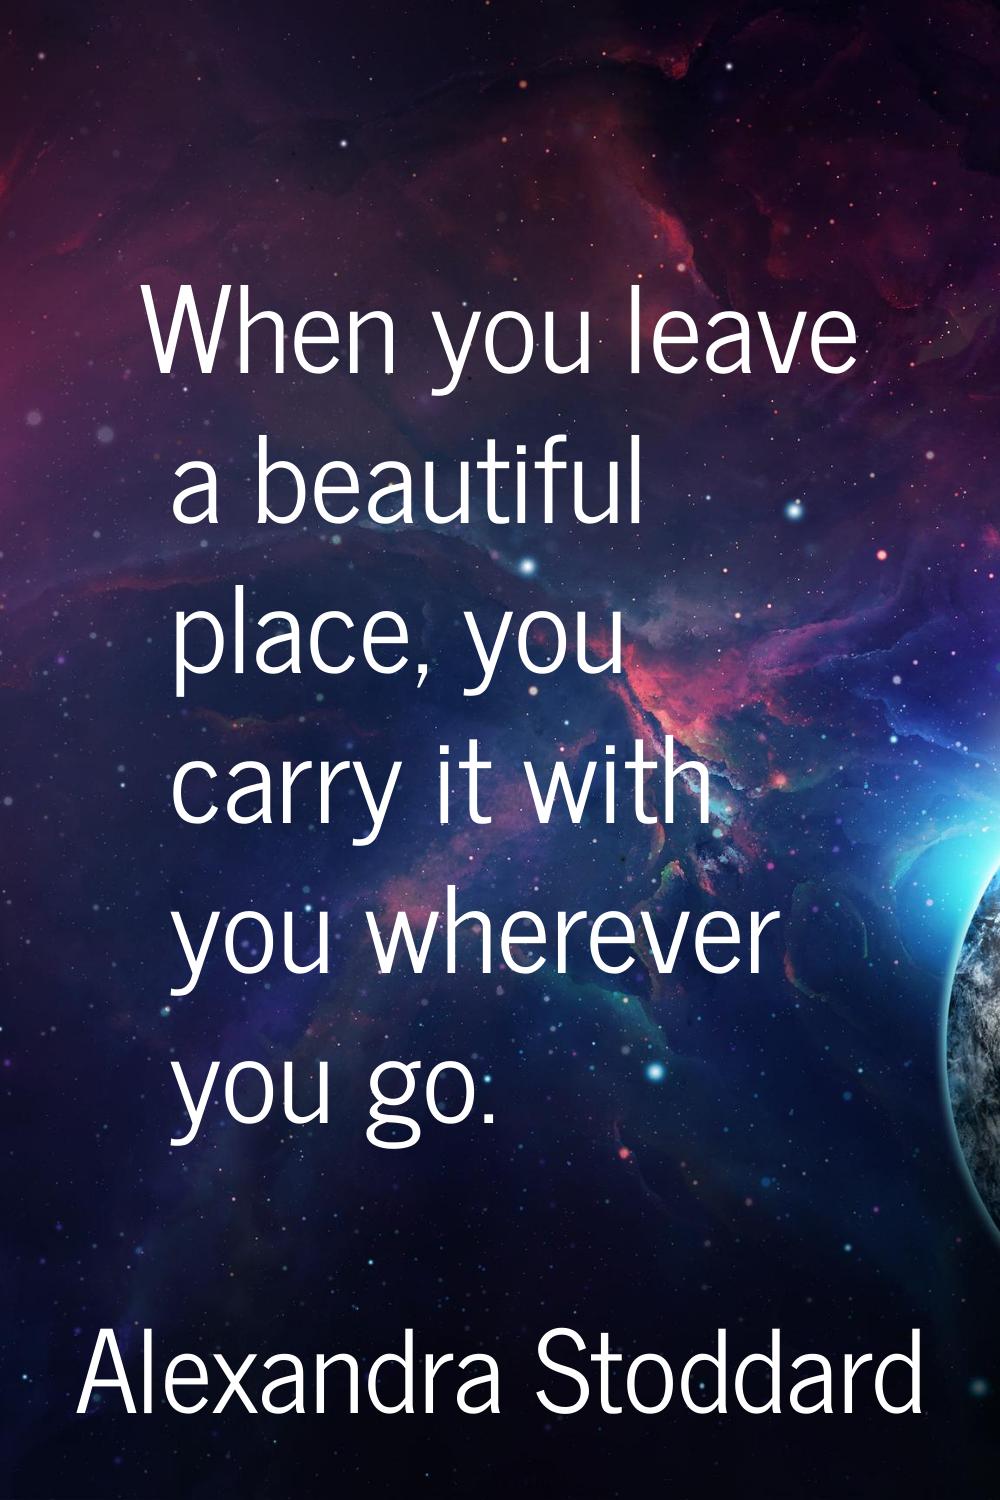 When you leave a beautiful place, you carry it with you wherever you go.